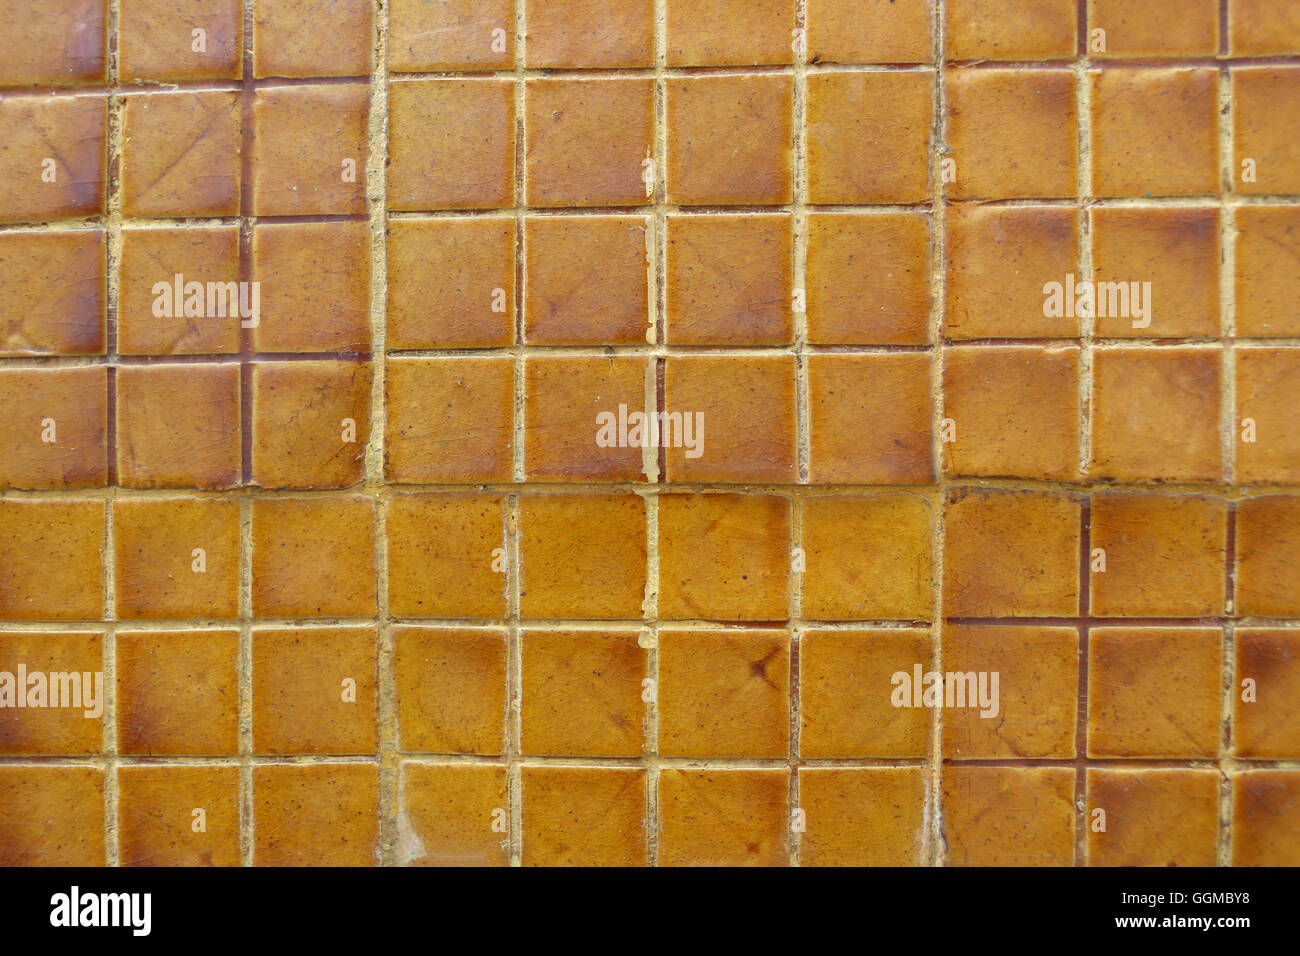 Old orange grunge wall tiles of the building texture for the design background. Stock Photo